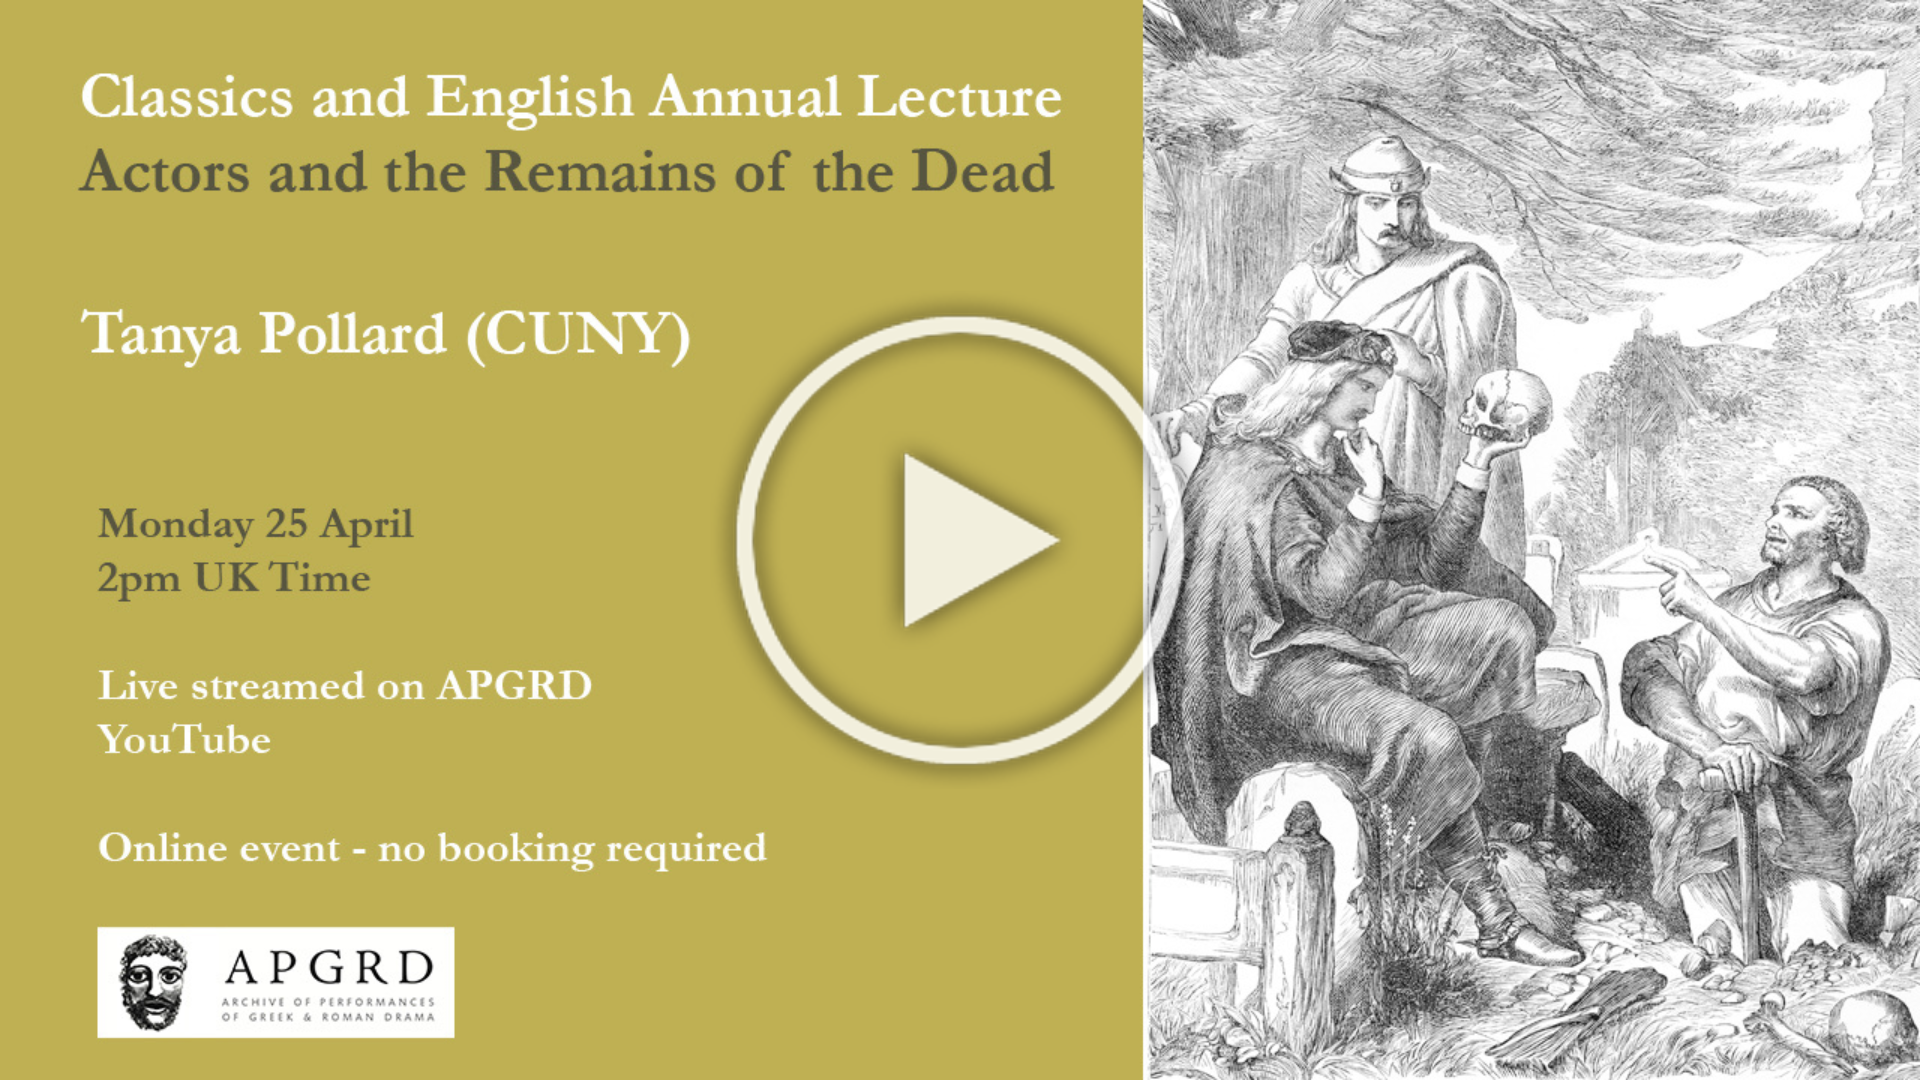 Recording of the Classics and English Annual Lecture at the APGRD in 2022, links to YouTube